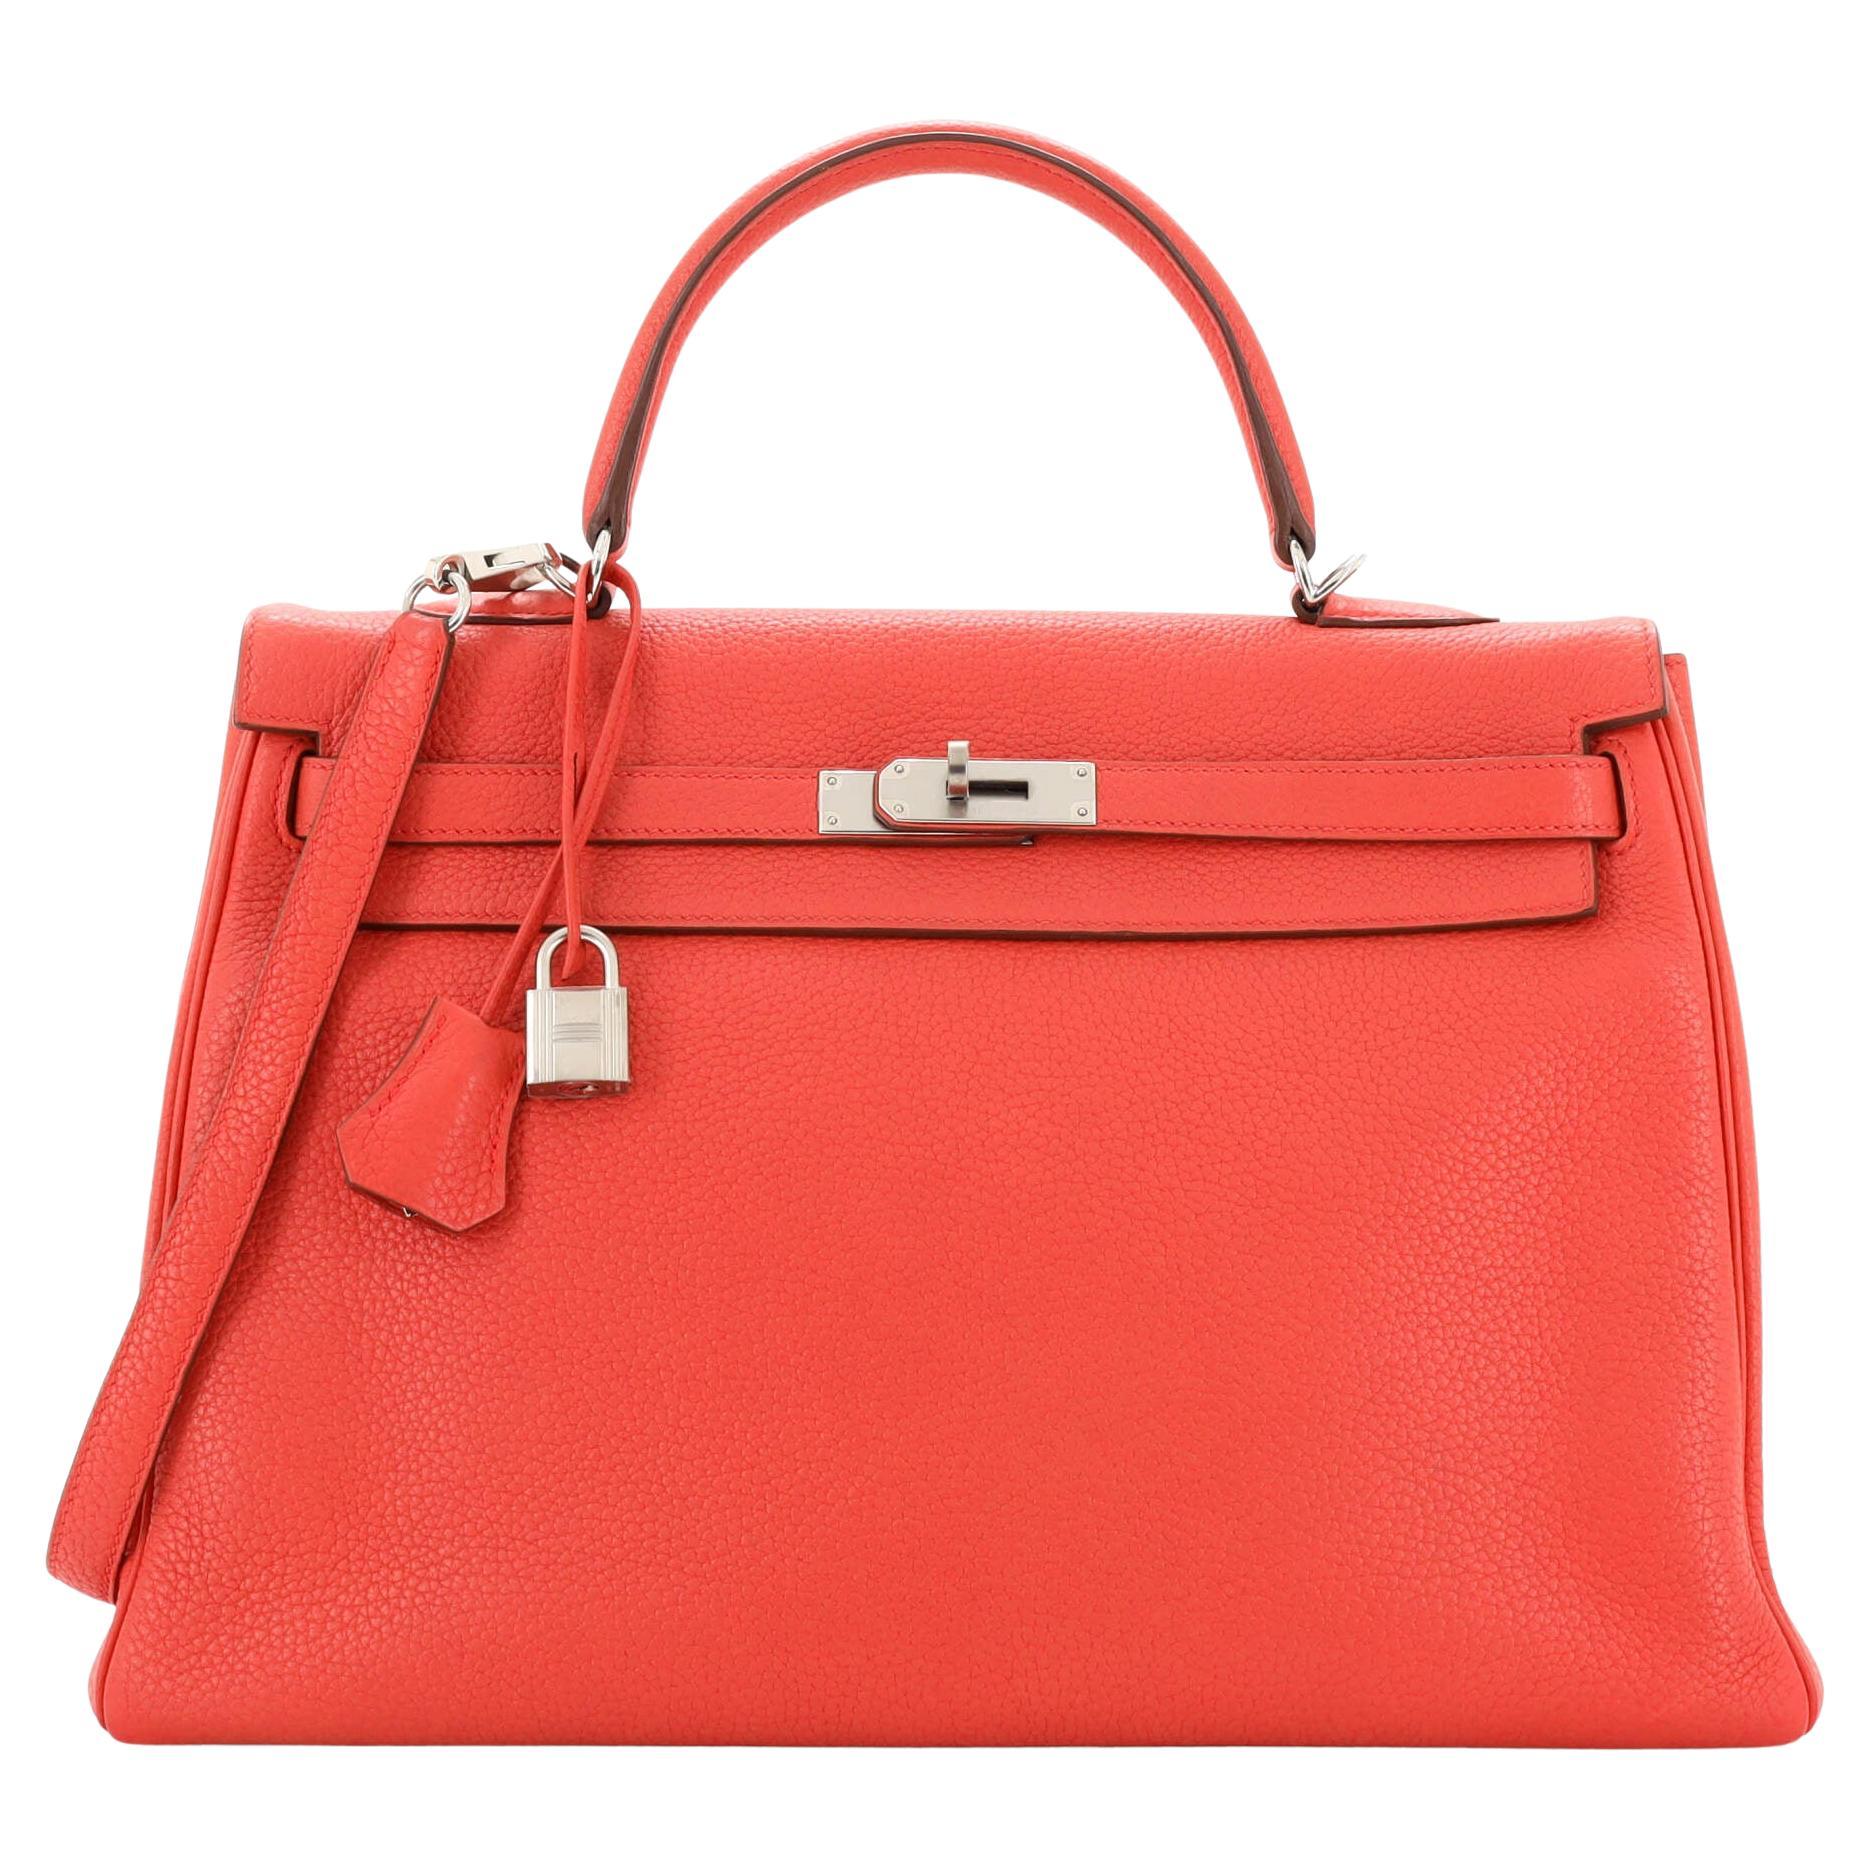 Hermes Kelly Handbag Red Clemence with Palladium Hardware 35 For Sale